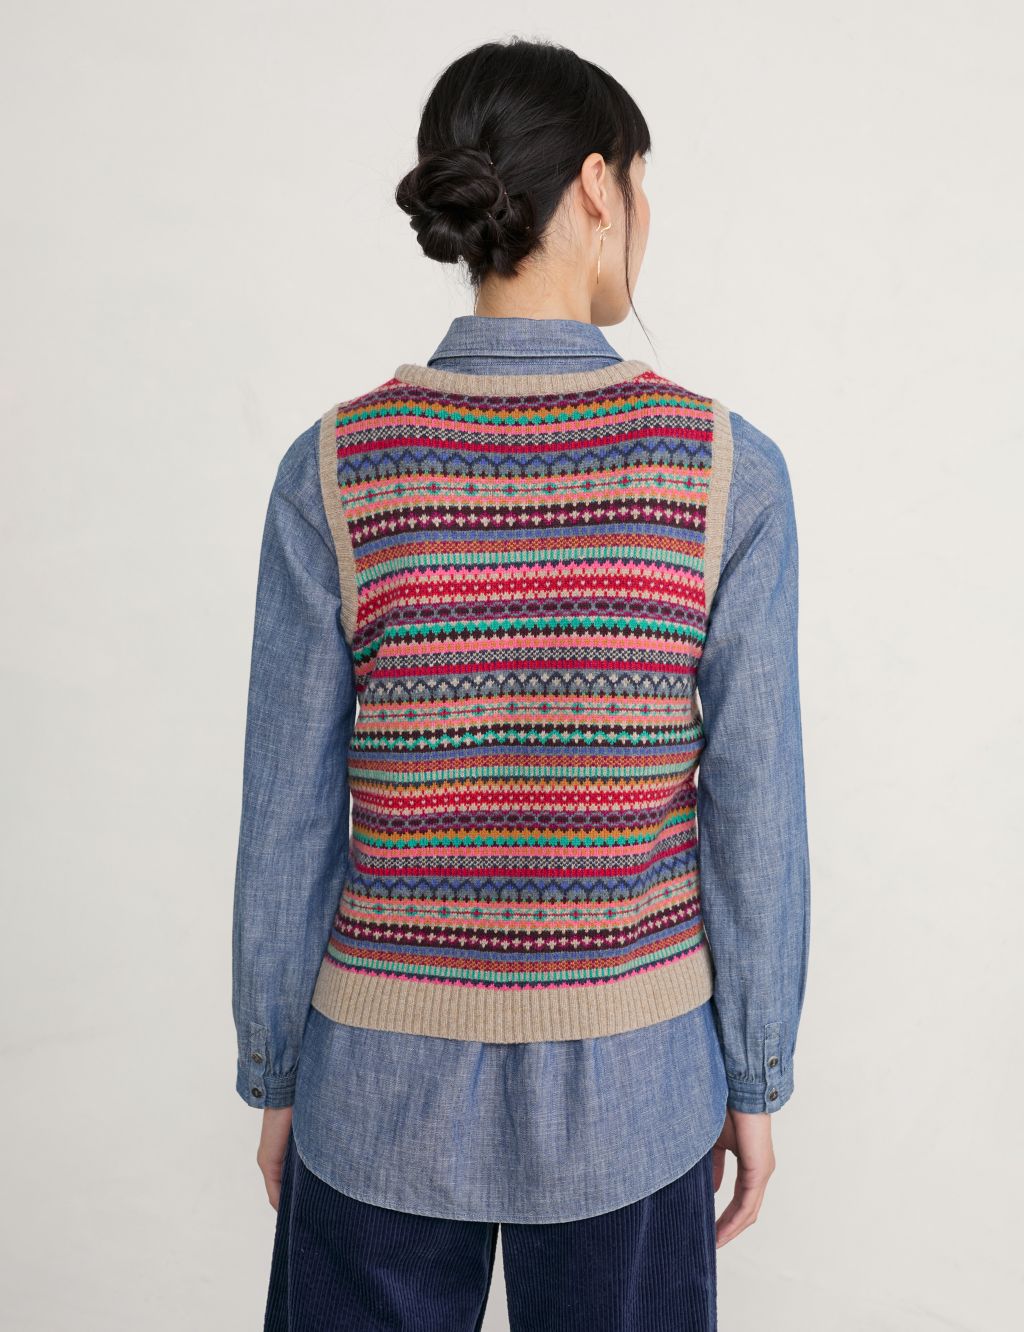 Merino Wool Rich Jacquard Knitted Vest image 3